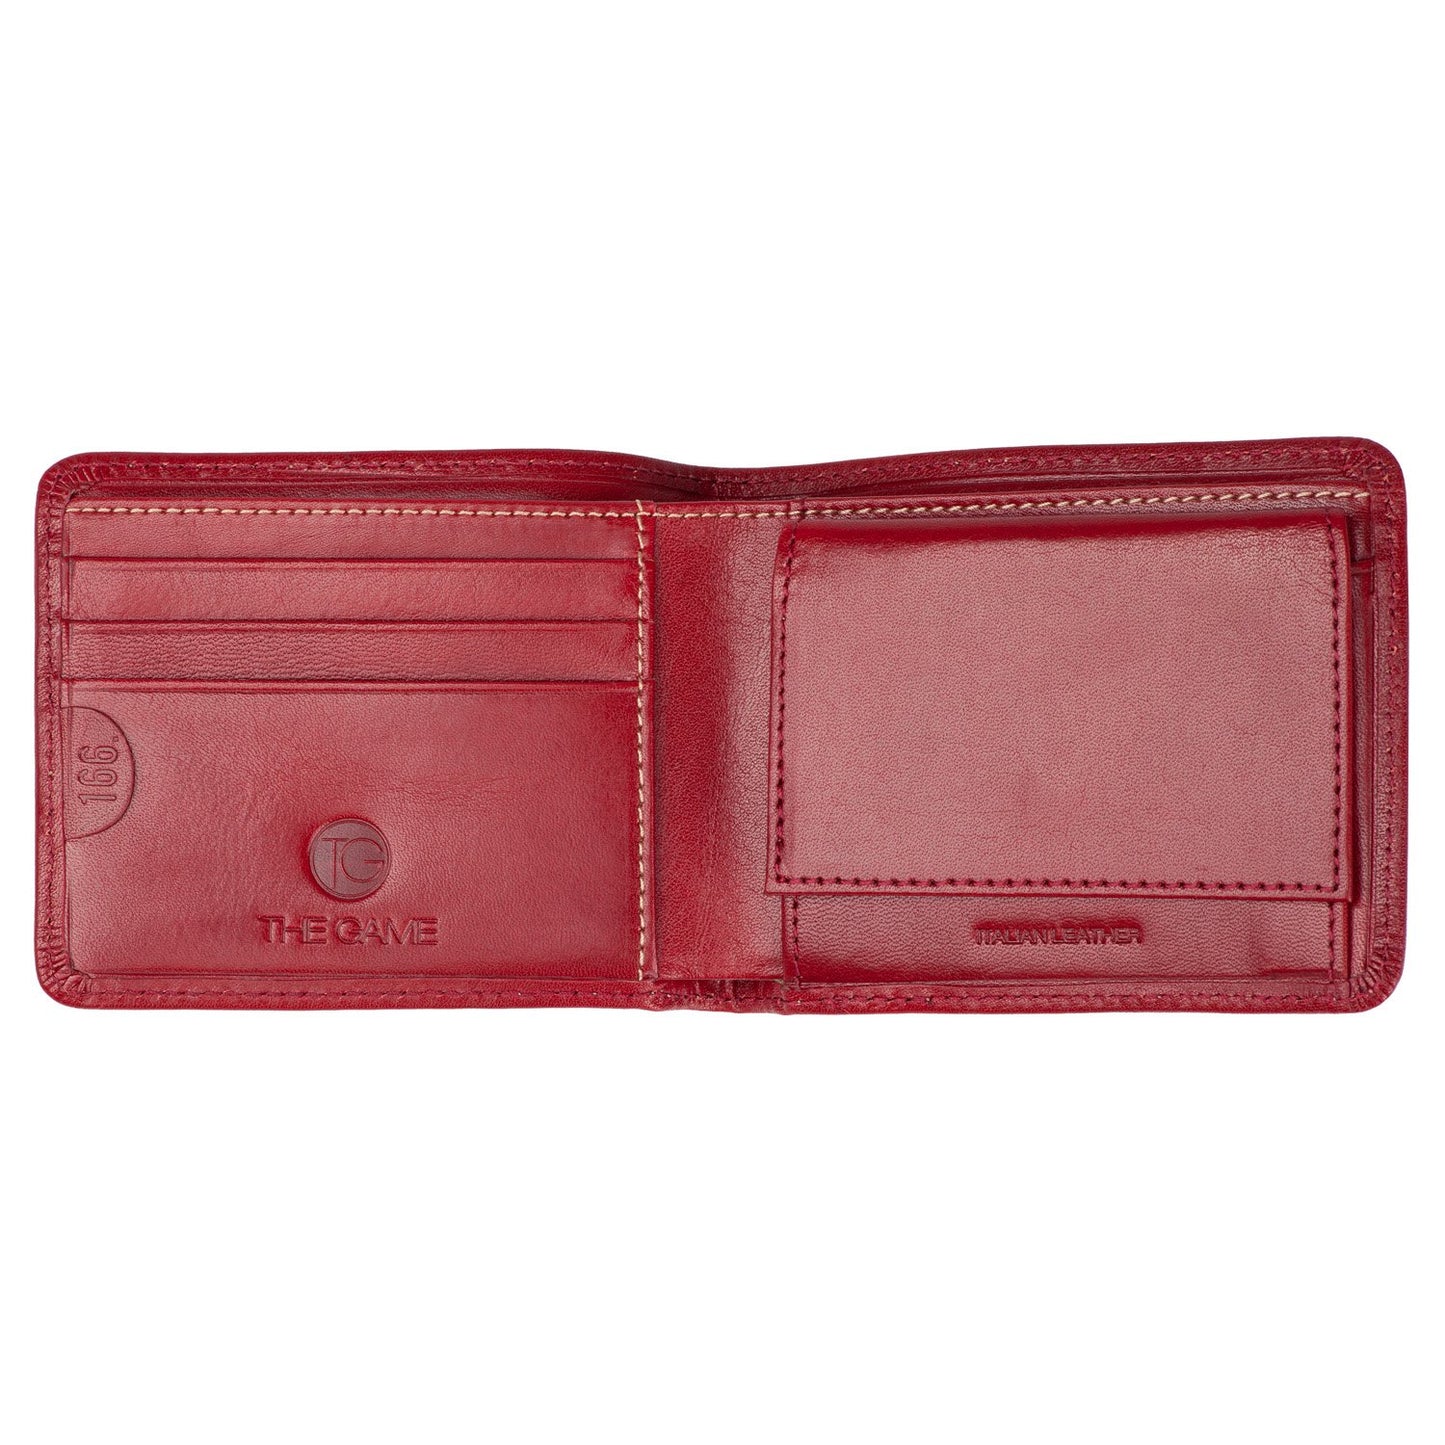 The All - Rounder Men's Wallet